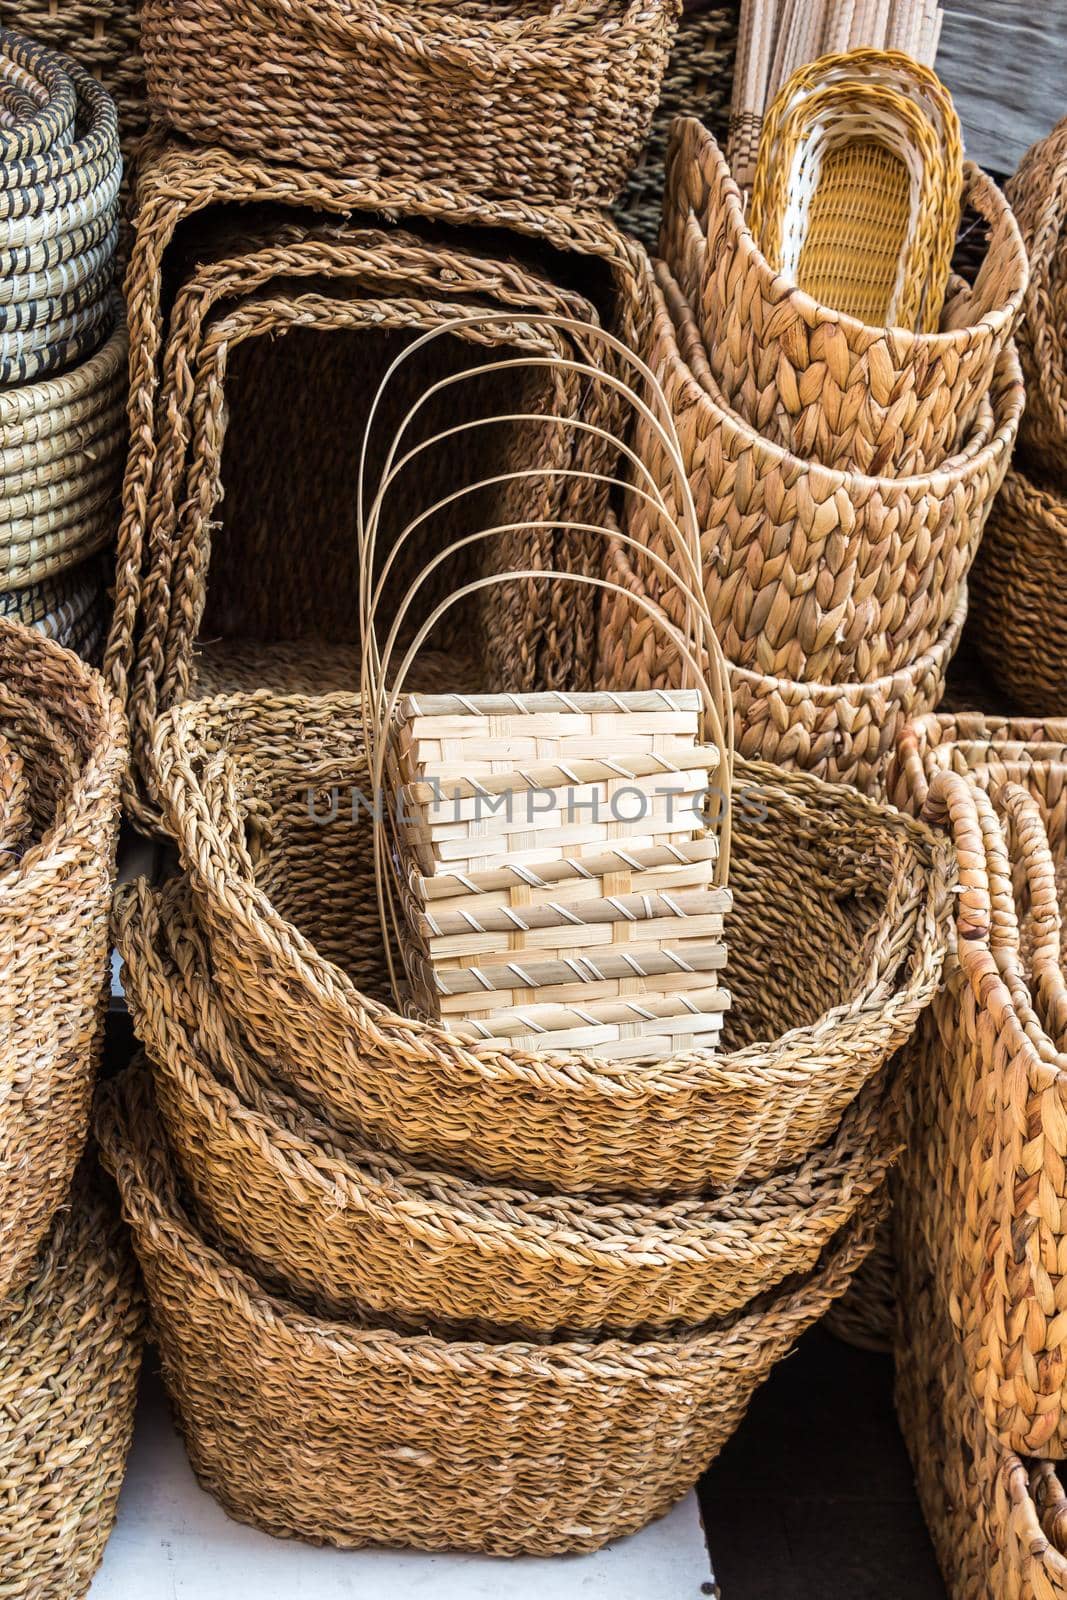 Empty wicker baskets are for sale in a market place